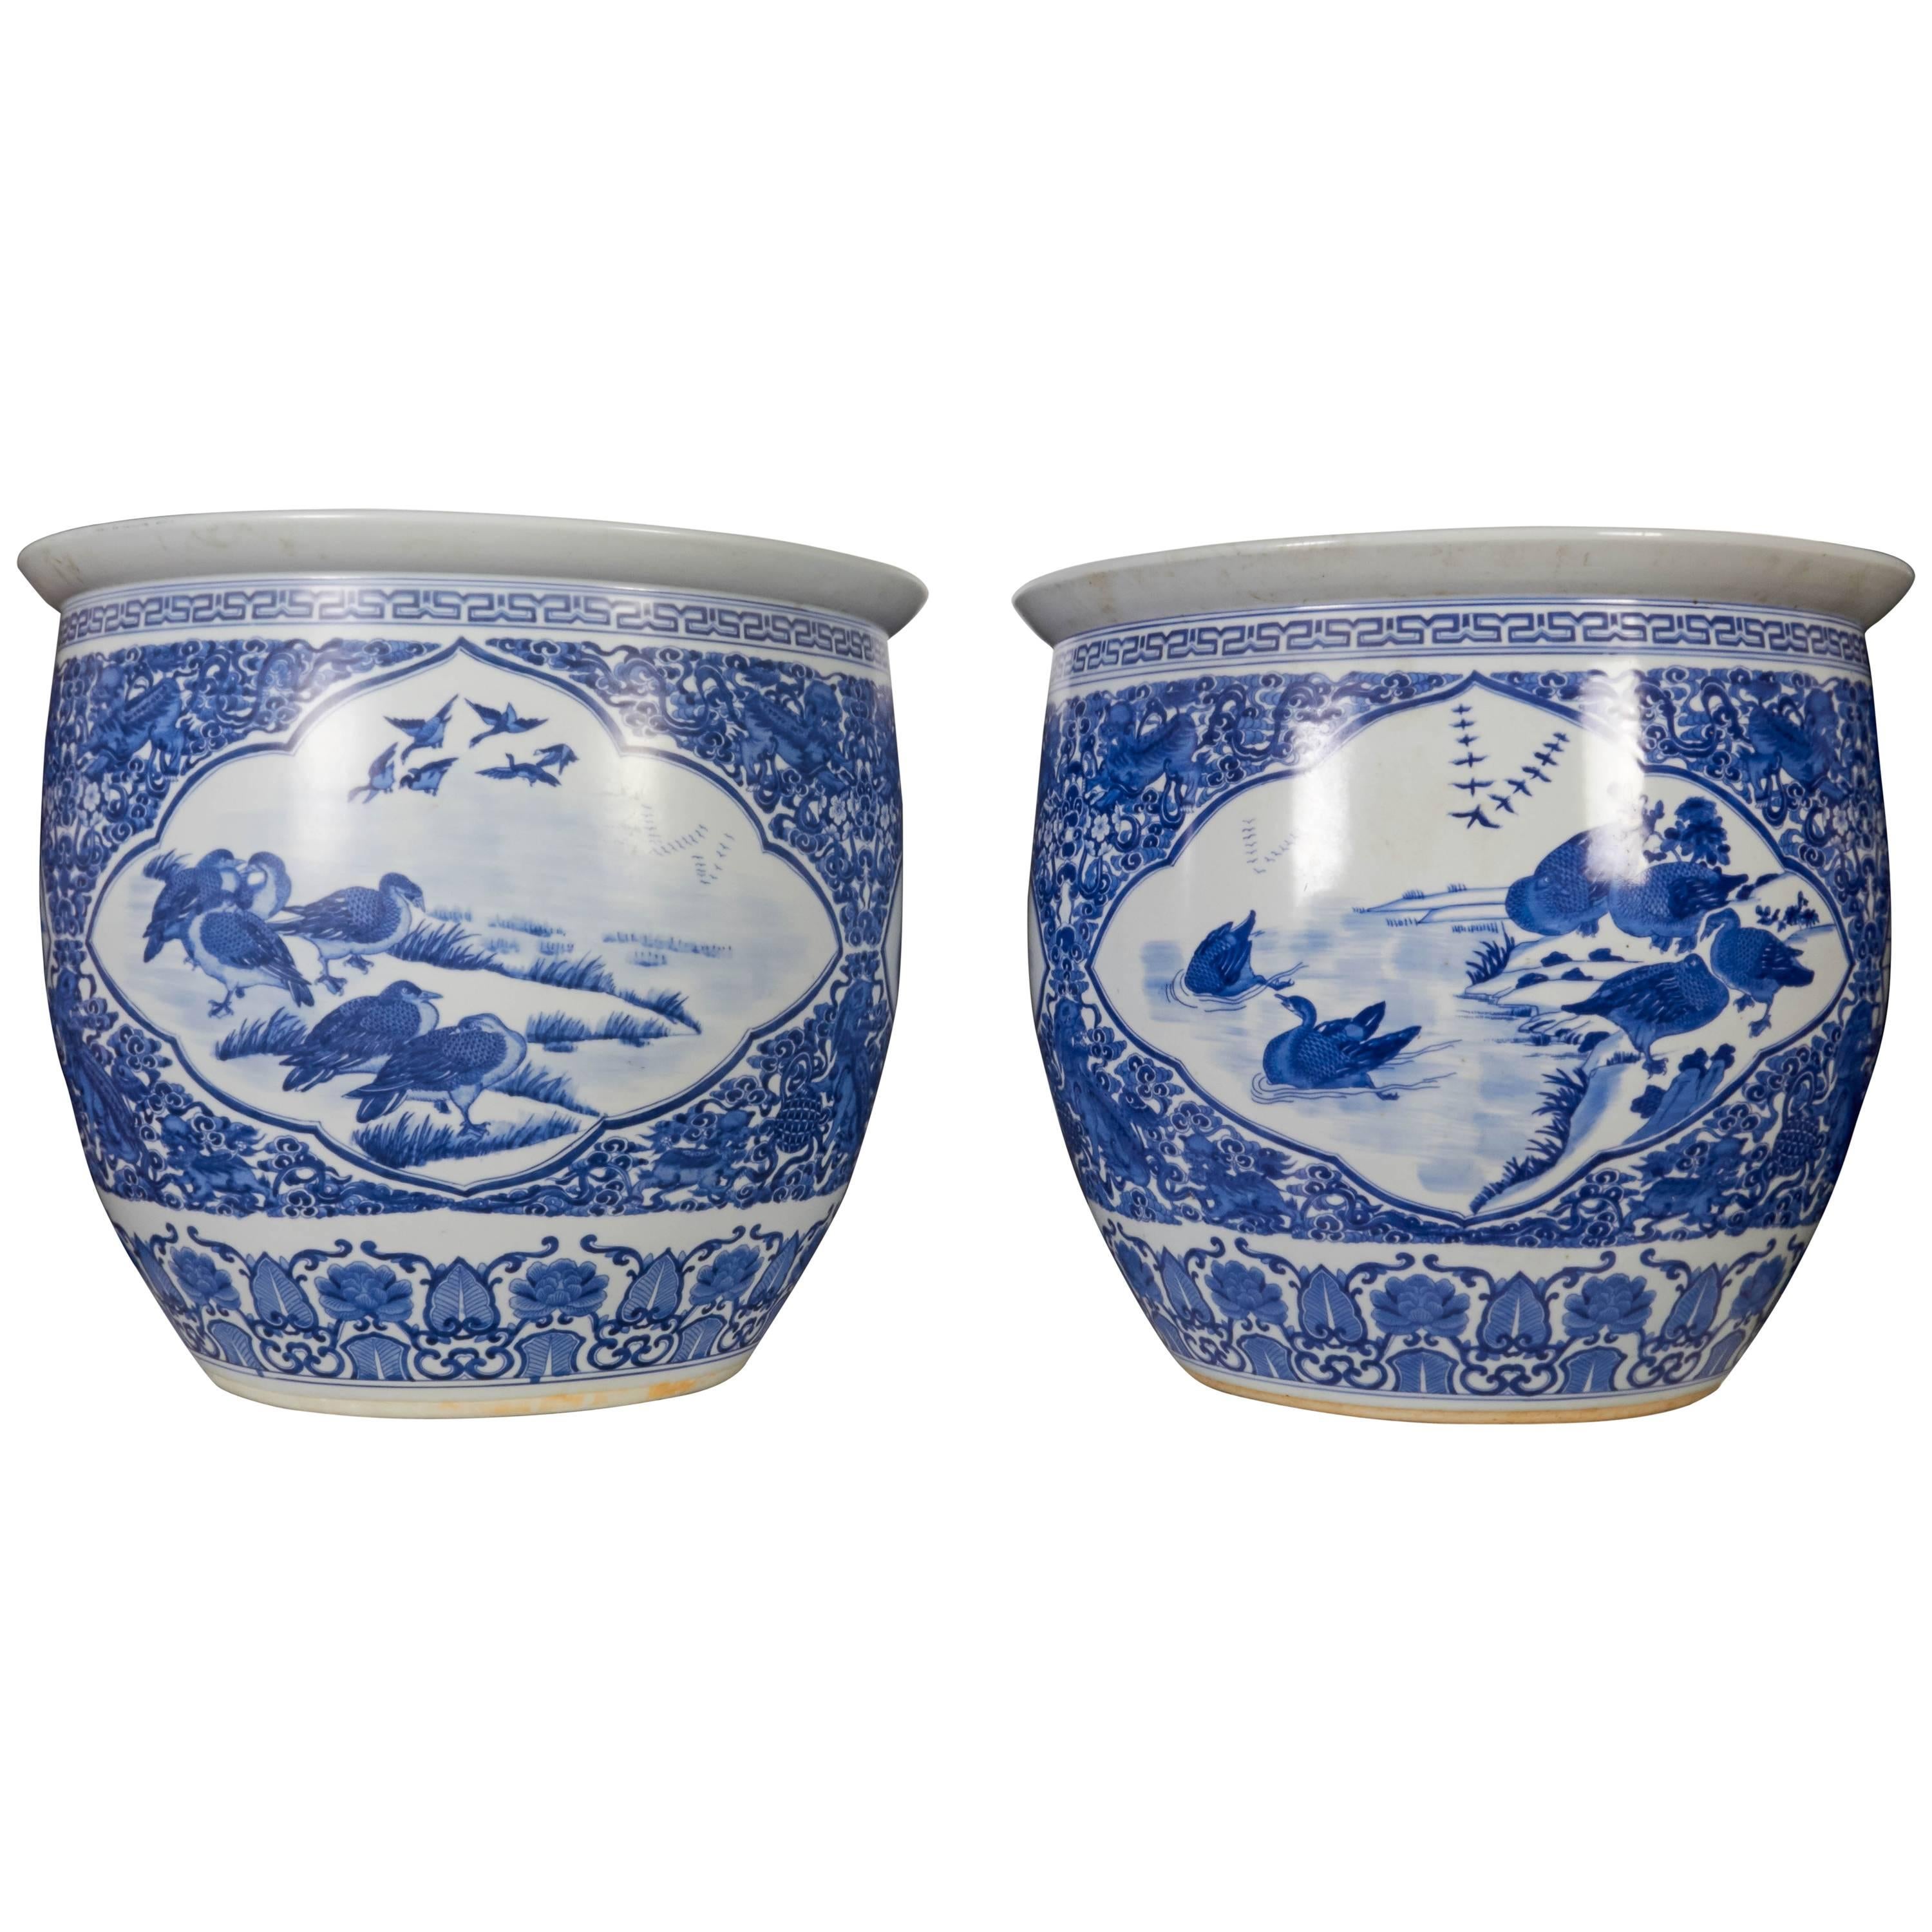 Large Pair of Chinese Blue and White Porcelain Planters/Fishbowls/Jardinière